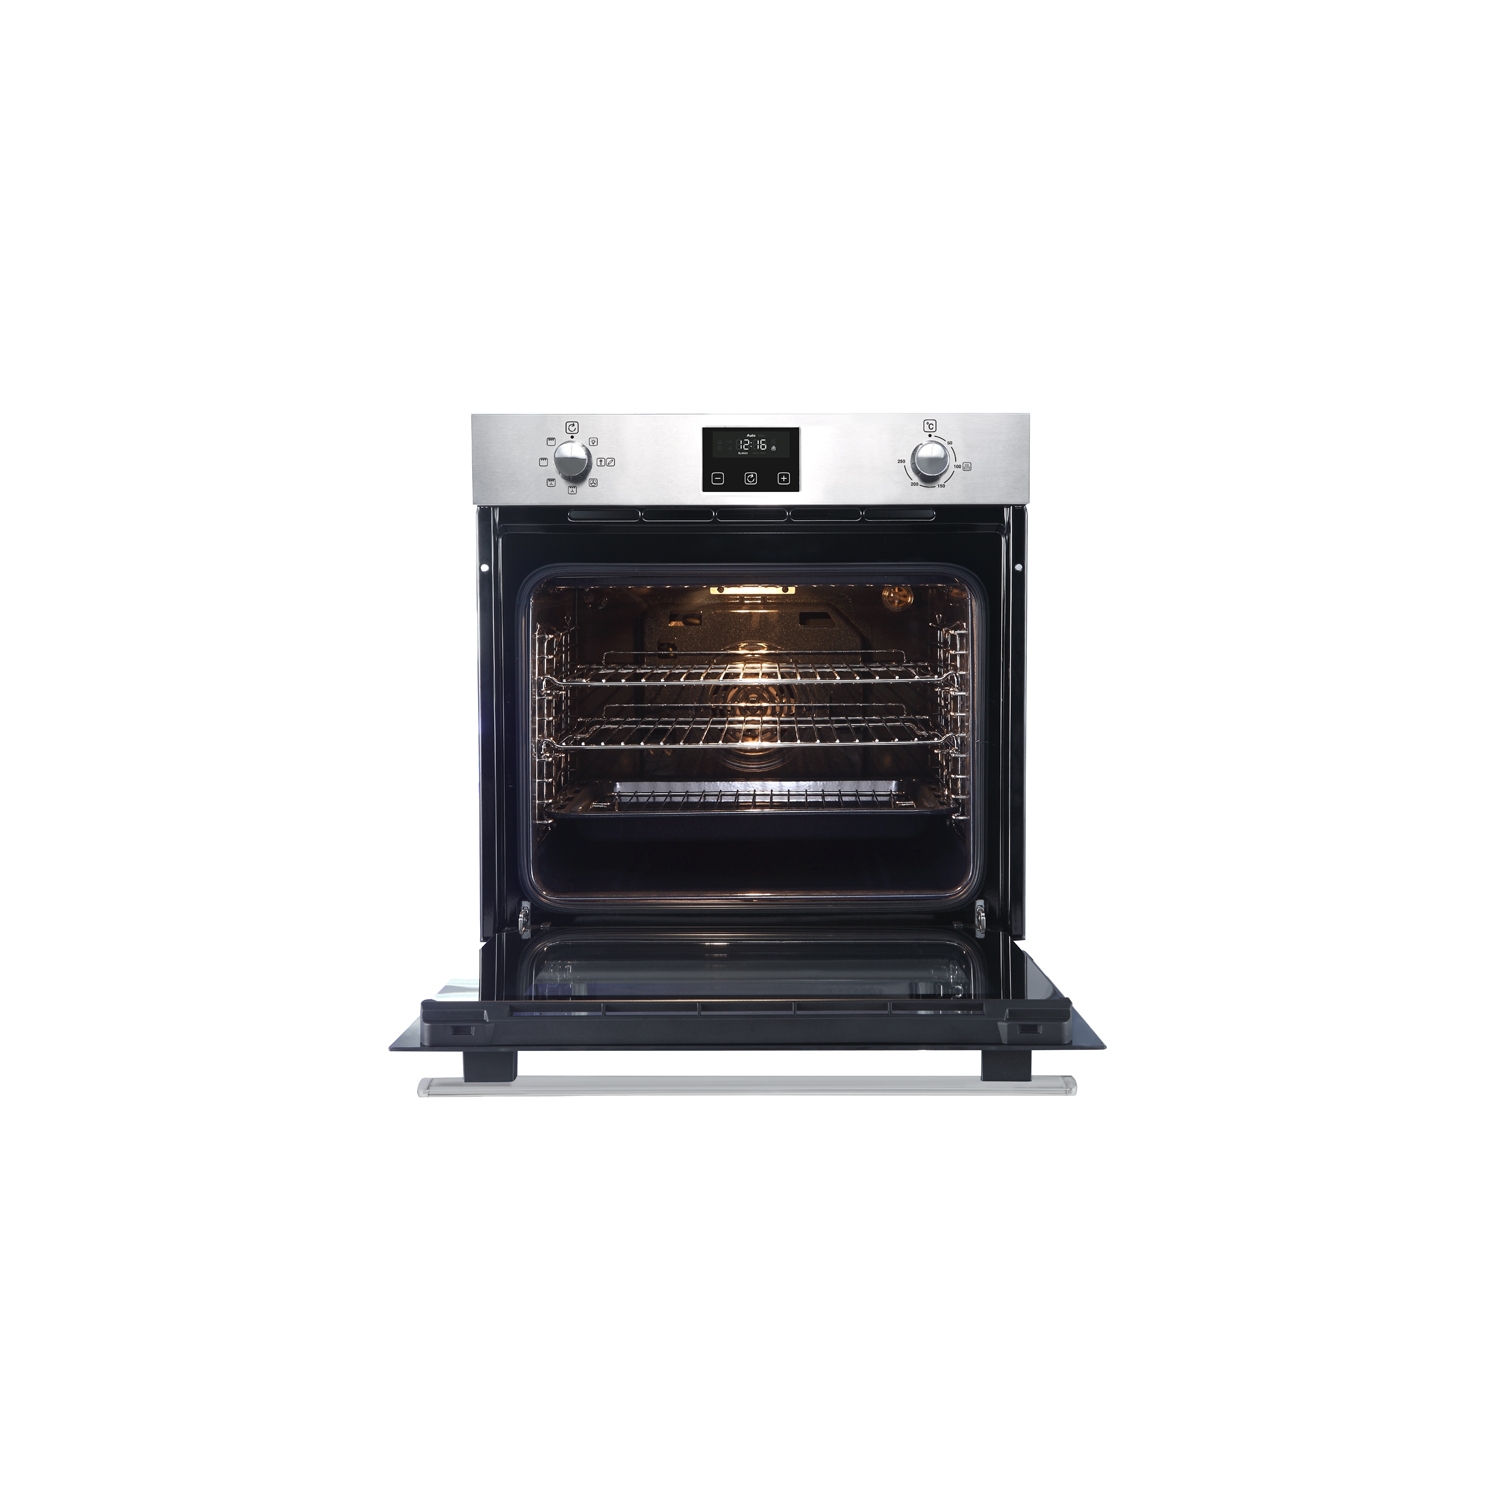 Belling 60cm Electric Oven - Stainless Steel - A Rated - 1